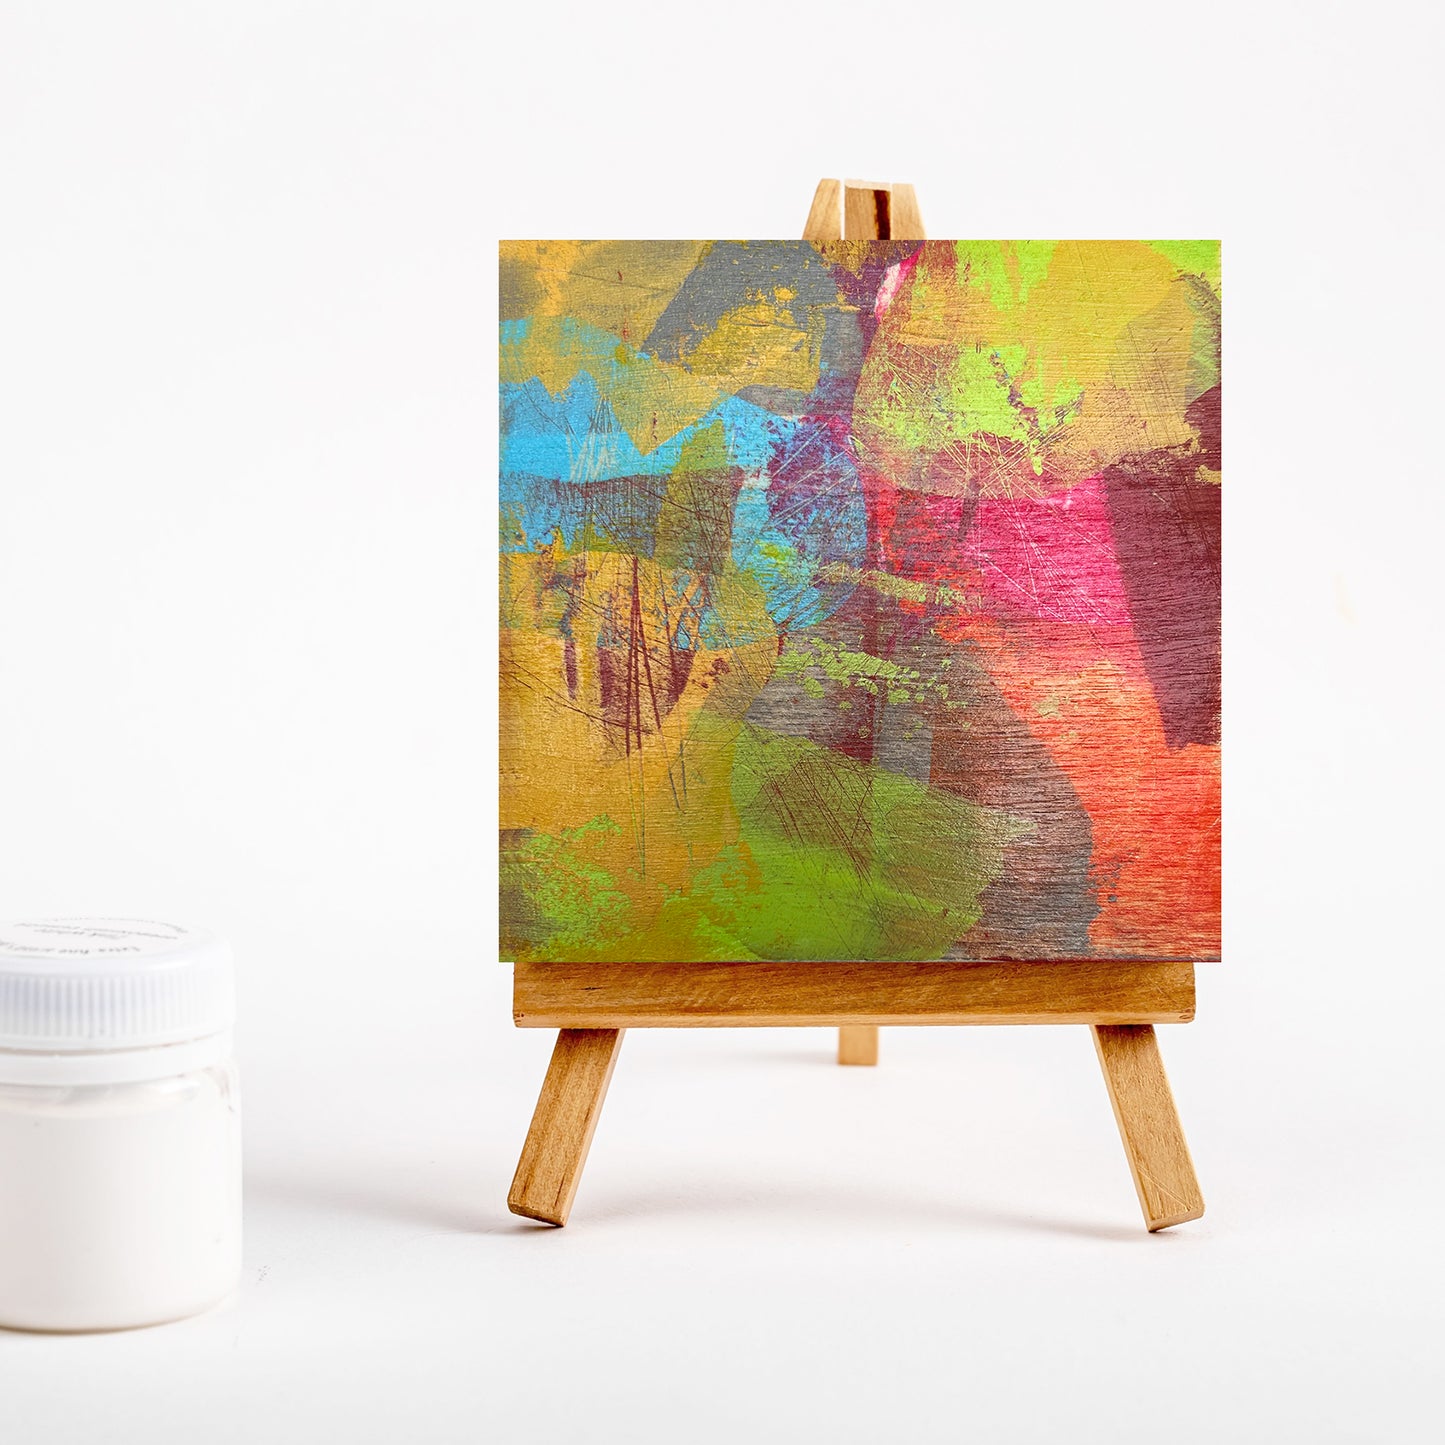 MINI "HOPE SERIES" PAINTING WITH EASEL - #303